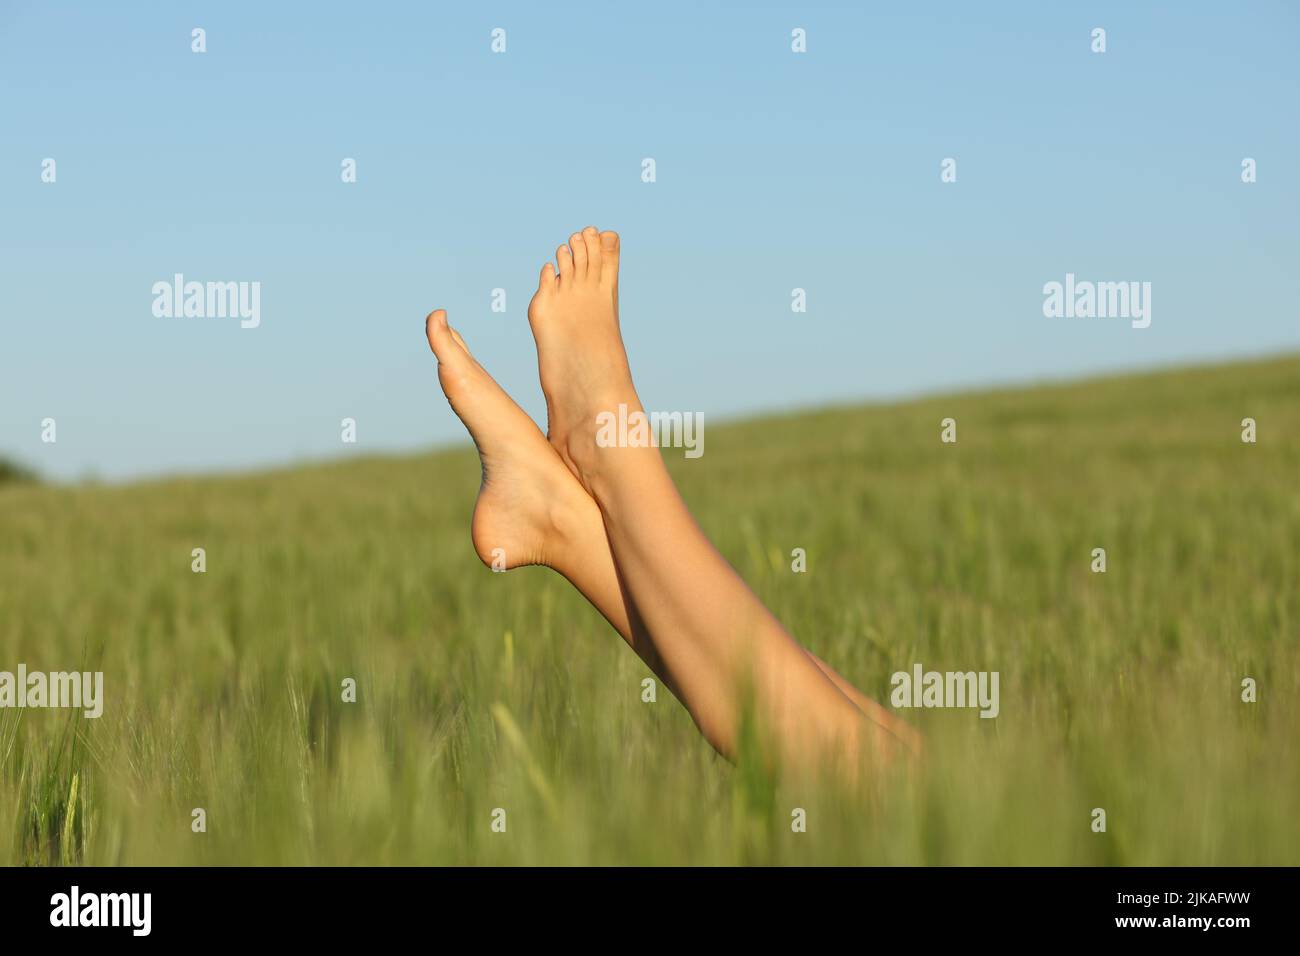 Close up portrait of a woman bare feet relaxed in a wheat field Stock Photo